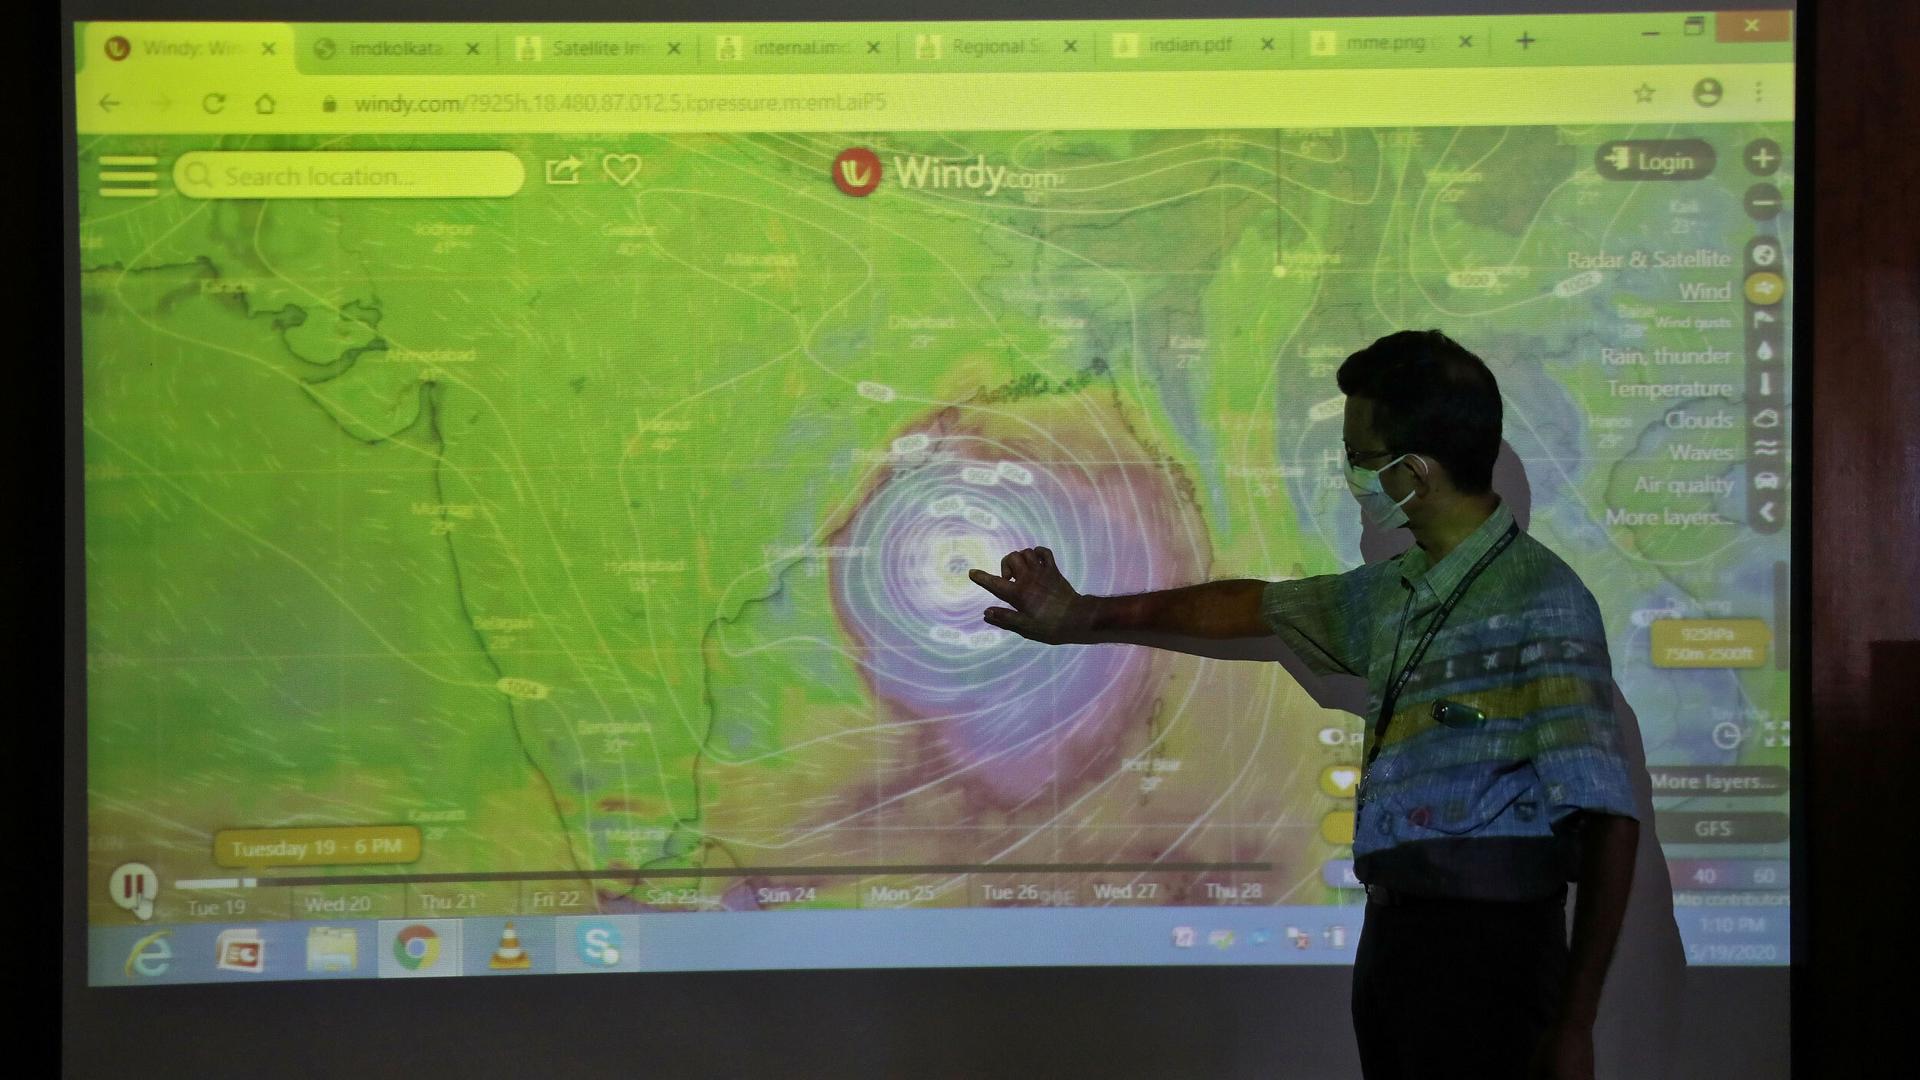 A man is shown wearing a protective face mask and pointing to an image of a cyclone projected on a screen.